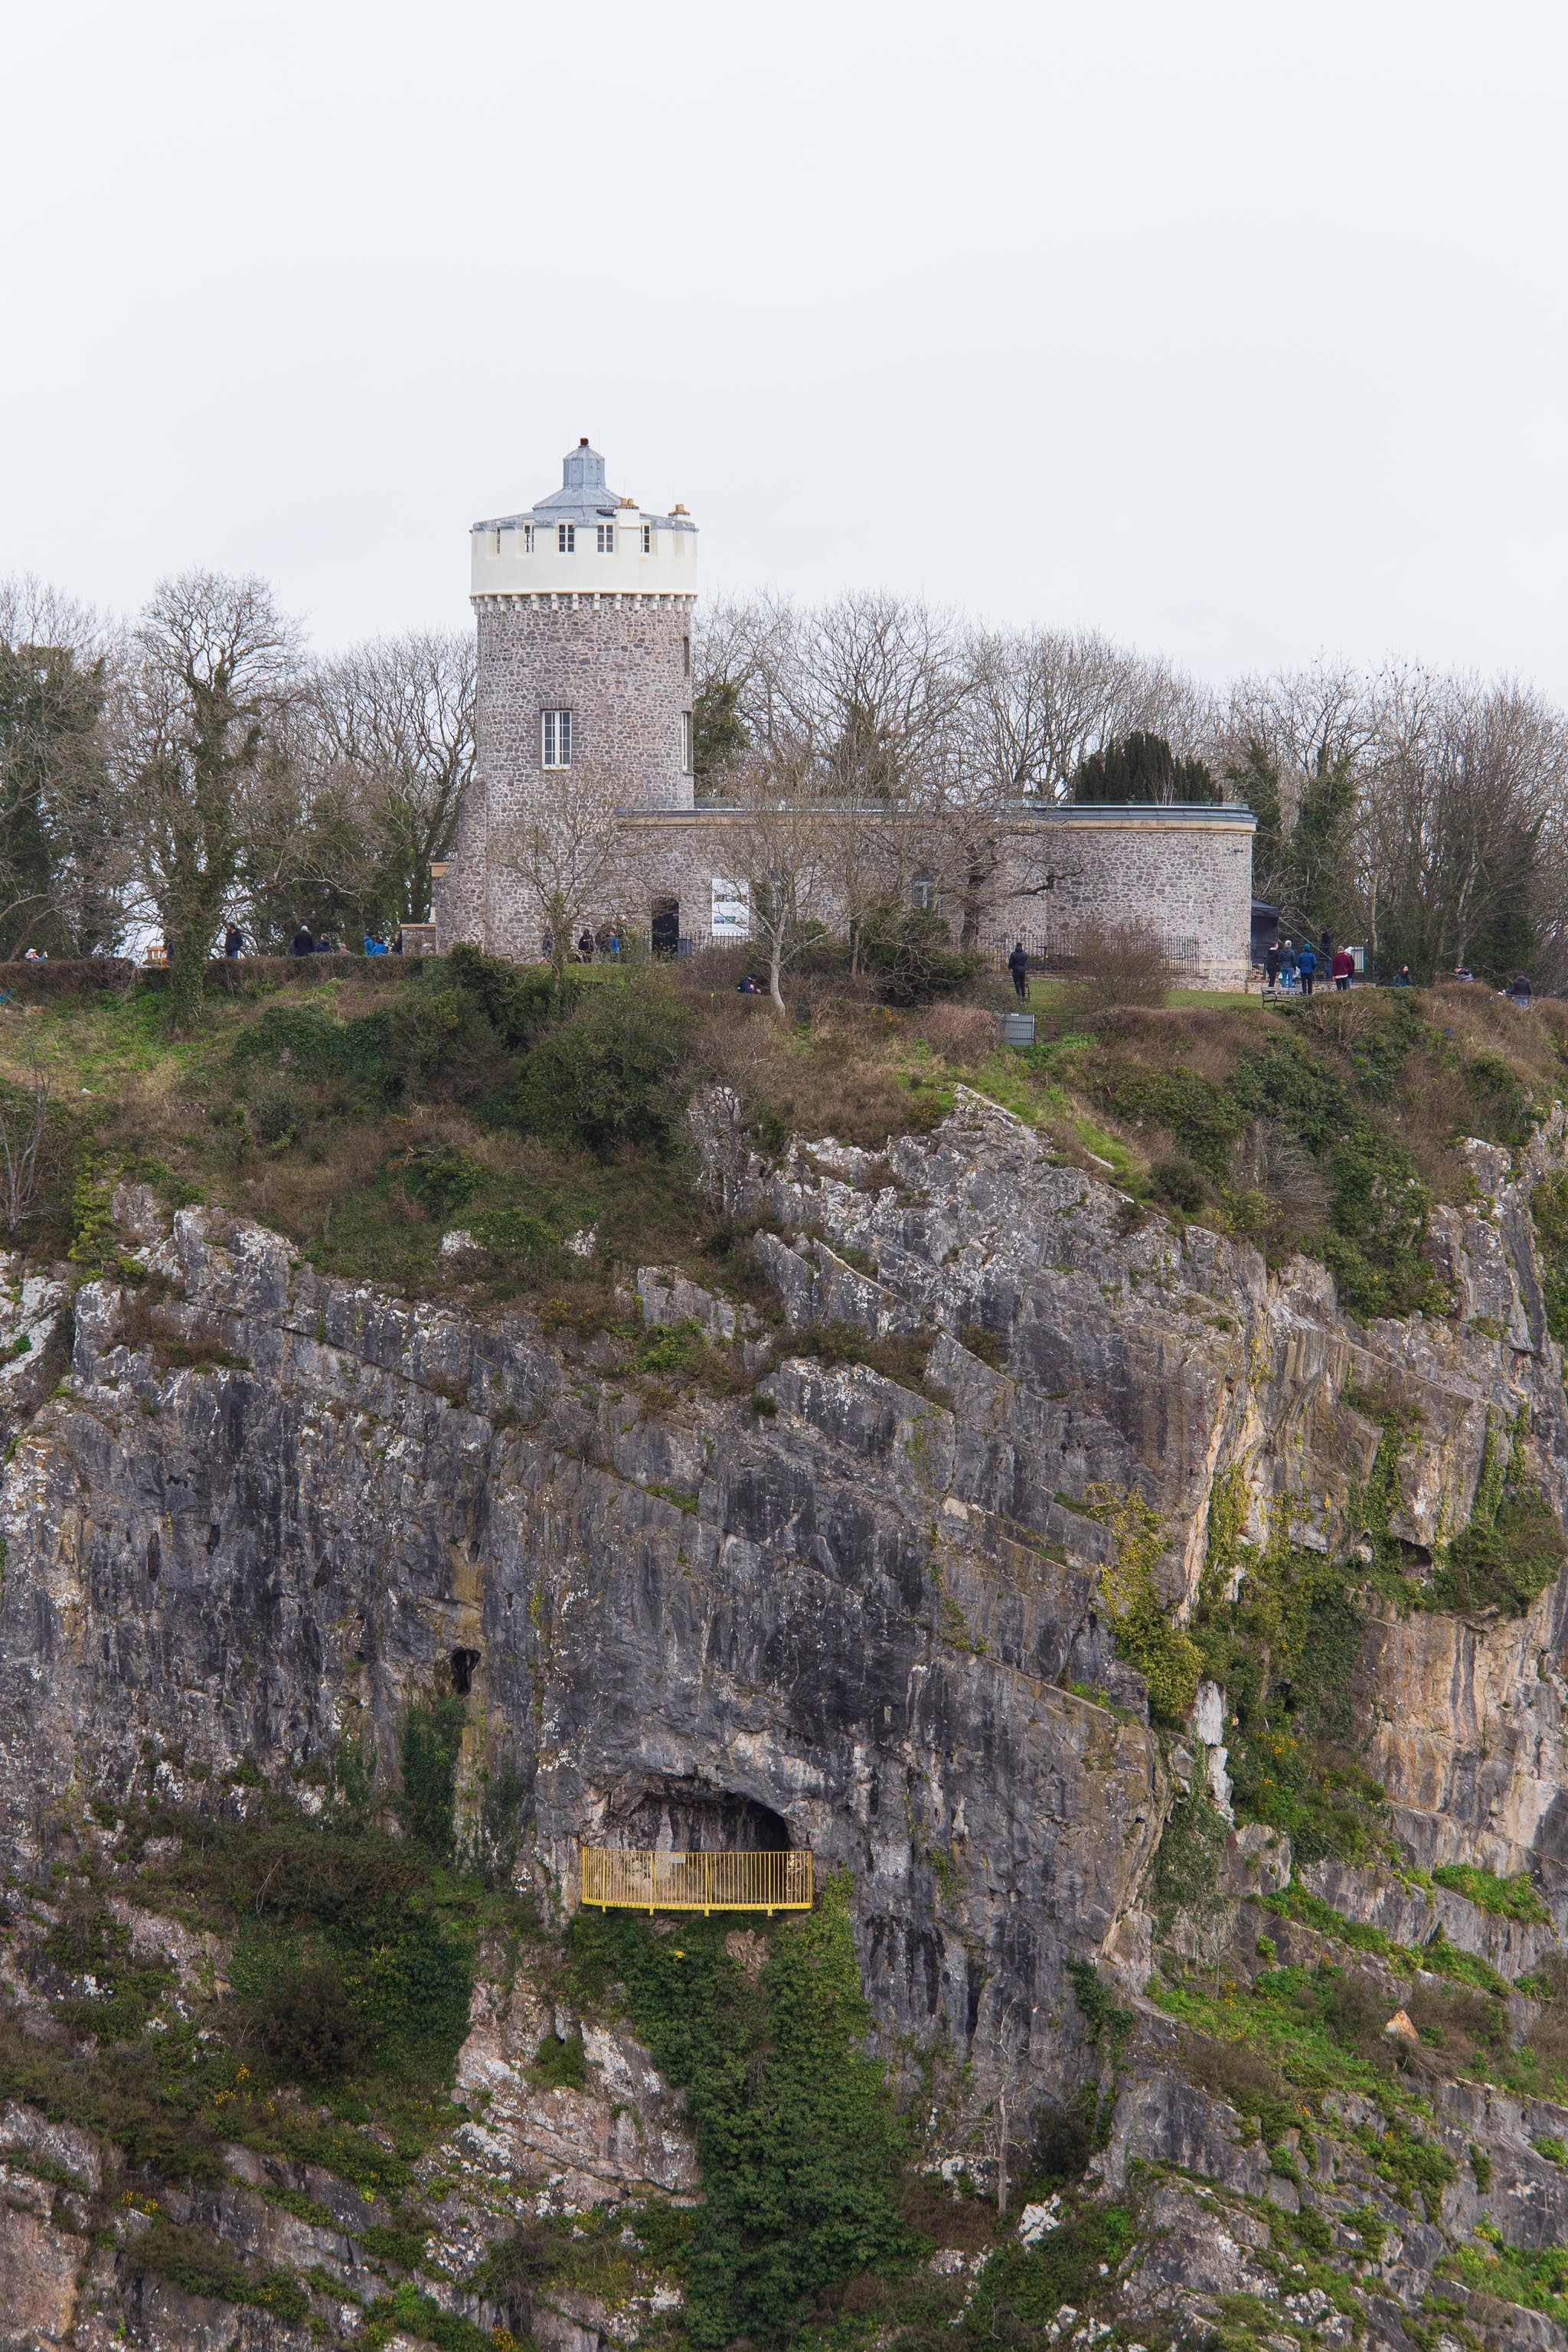 Observatory and Ghyston's Cave
